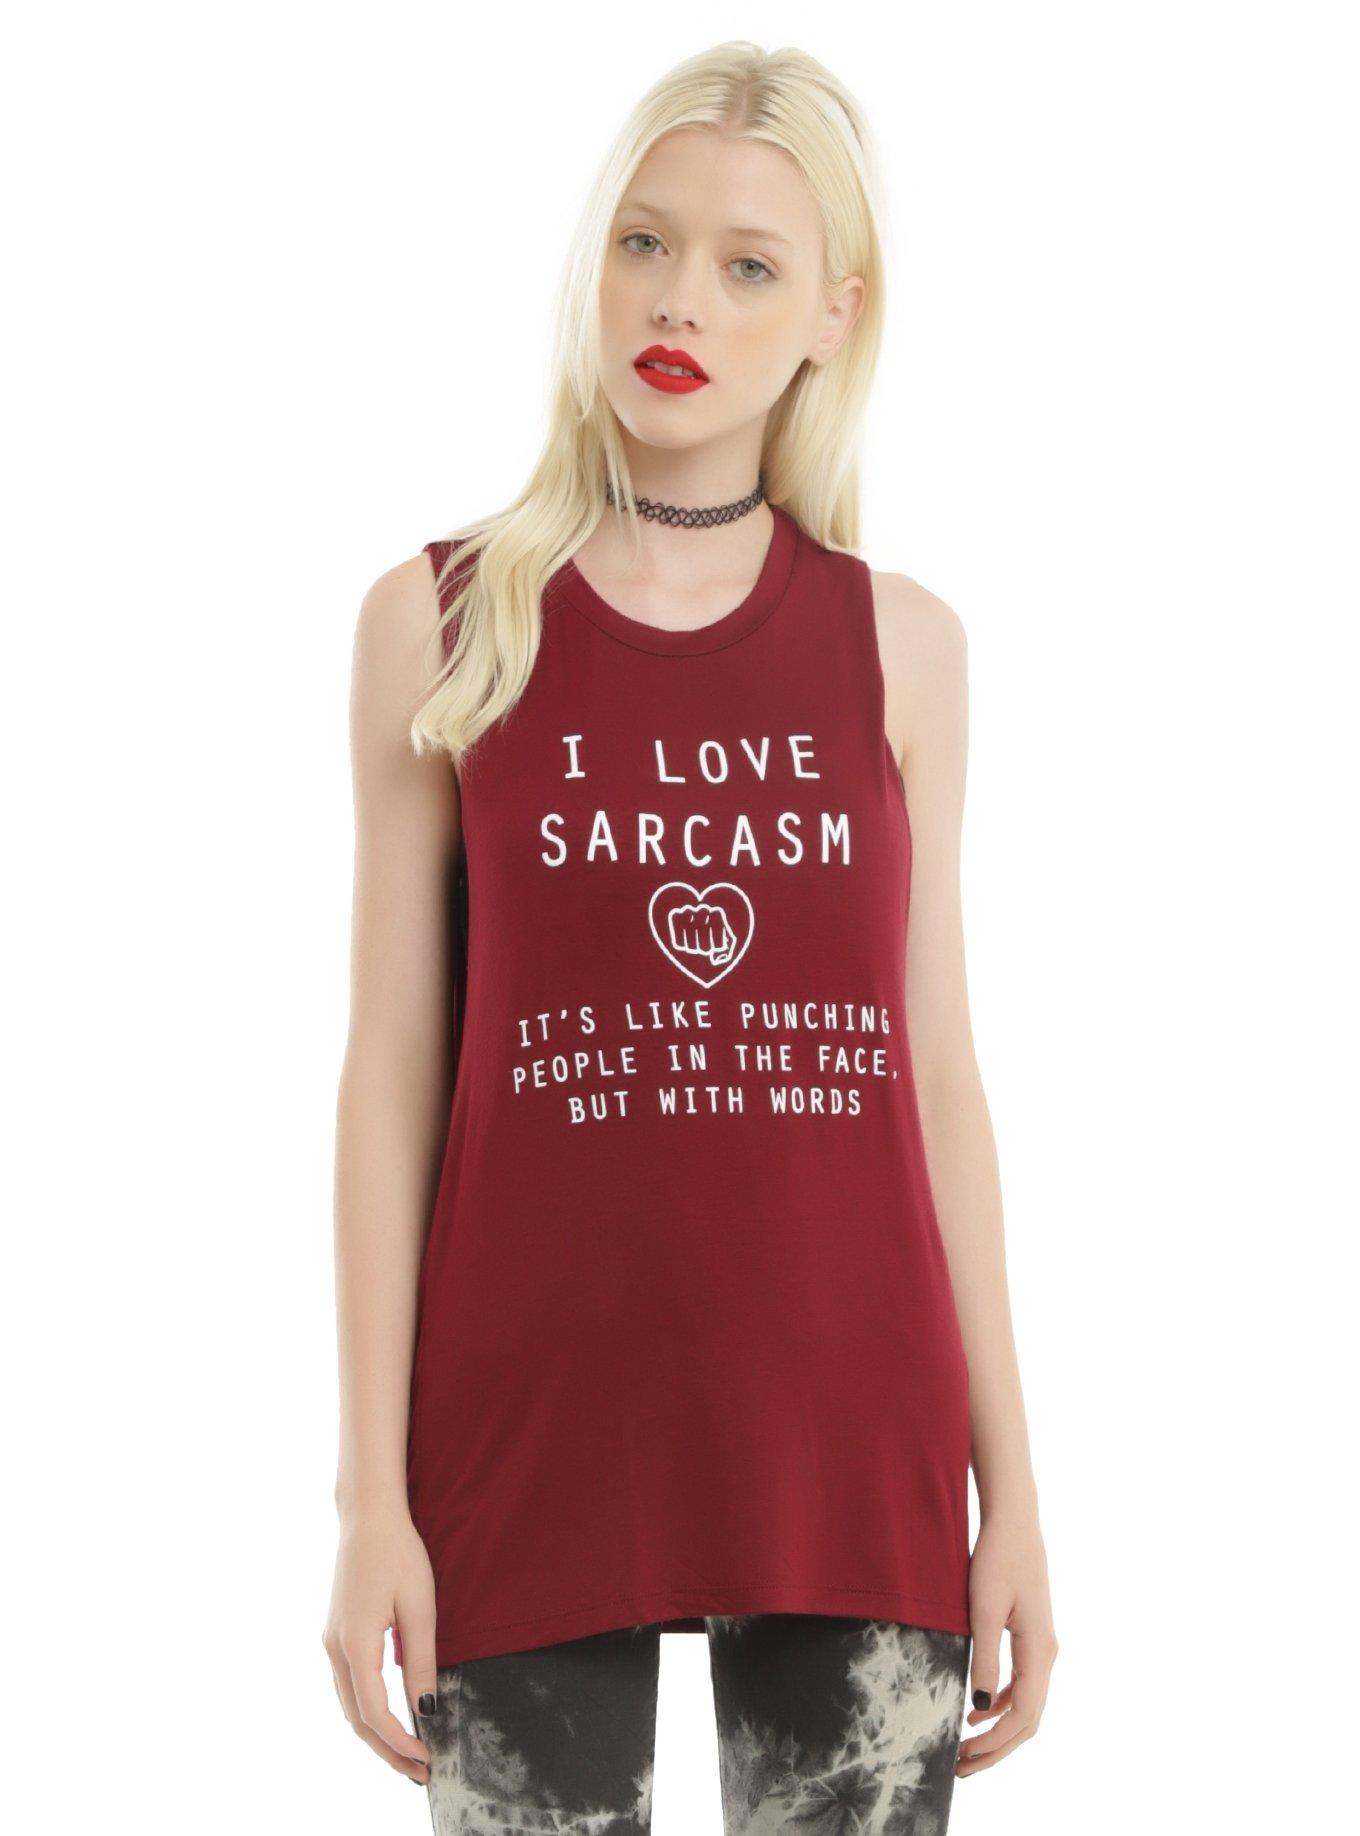 I Love Sarcasm Girls Muscle Top, RED, hi-res